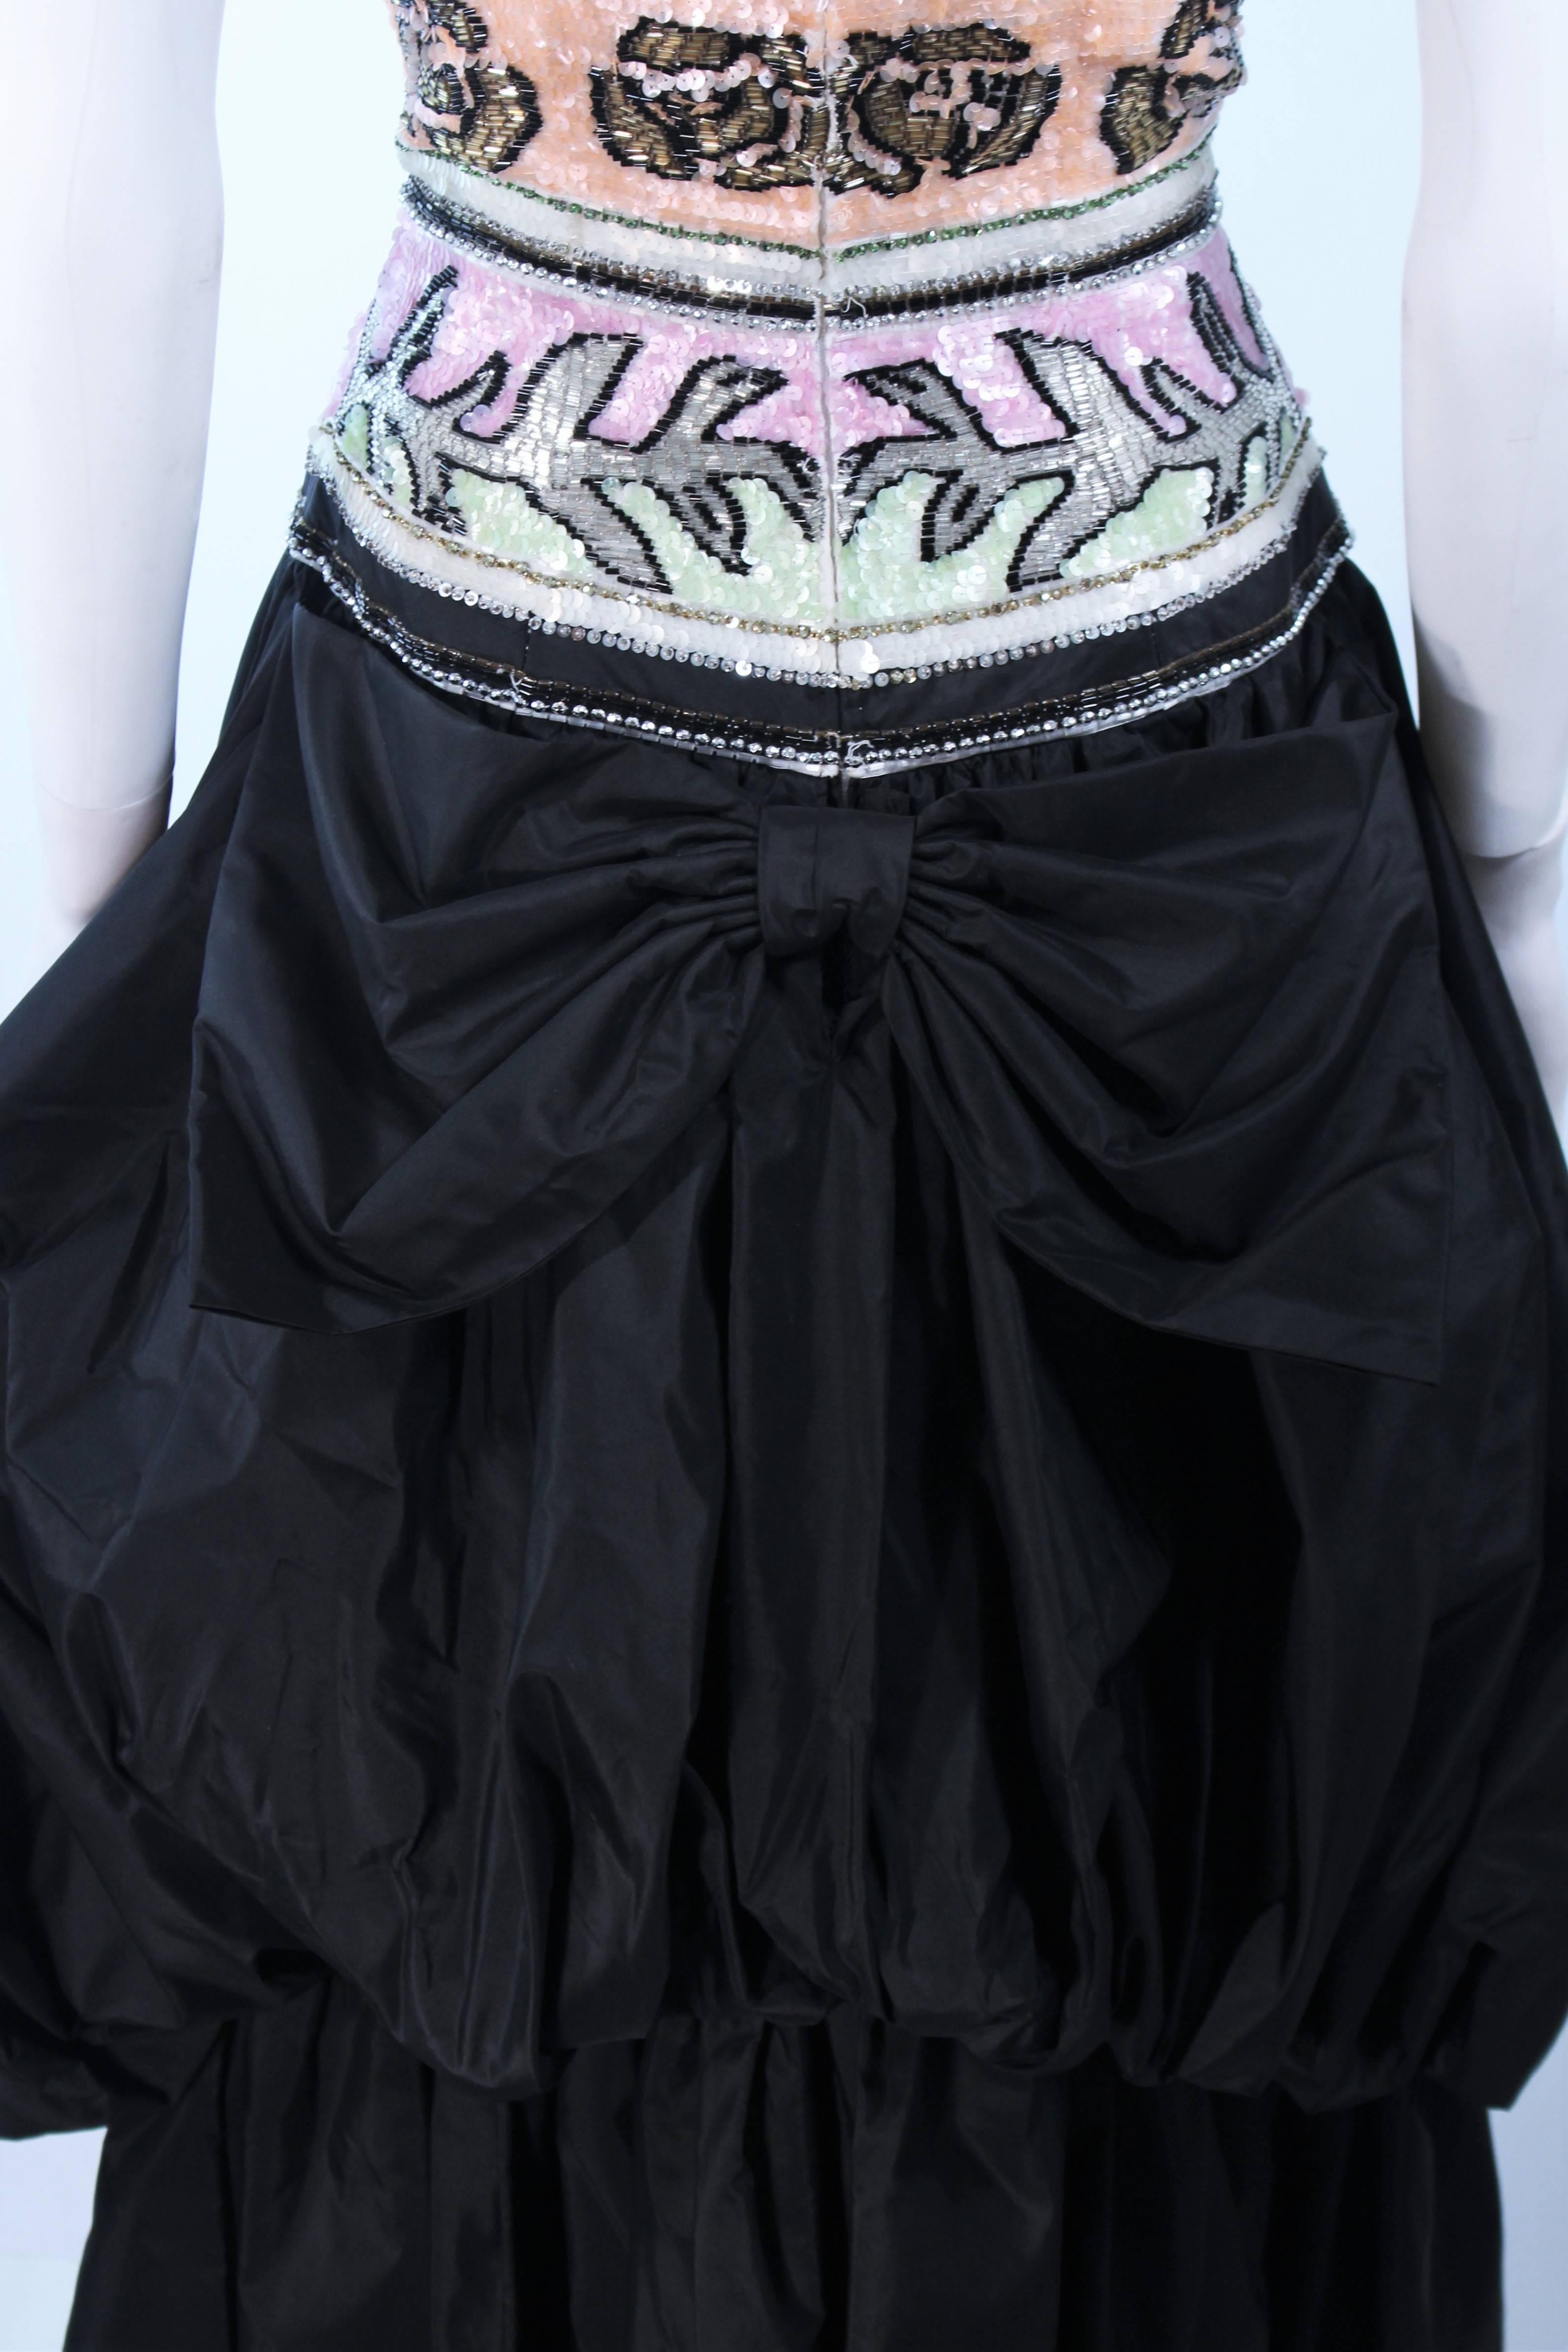 BRIAN WINSTON Black Tiered Puff Gown with Pastel Sequin Beaded Bodice Size 8 4